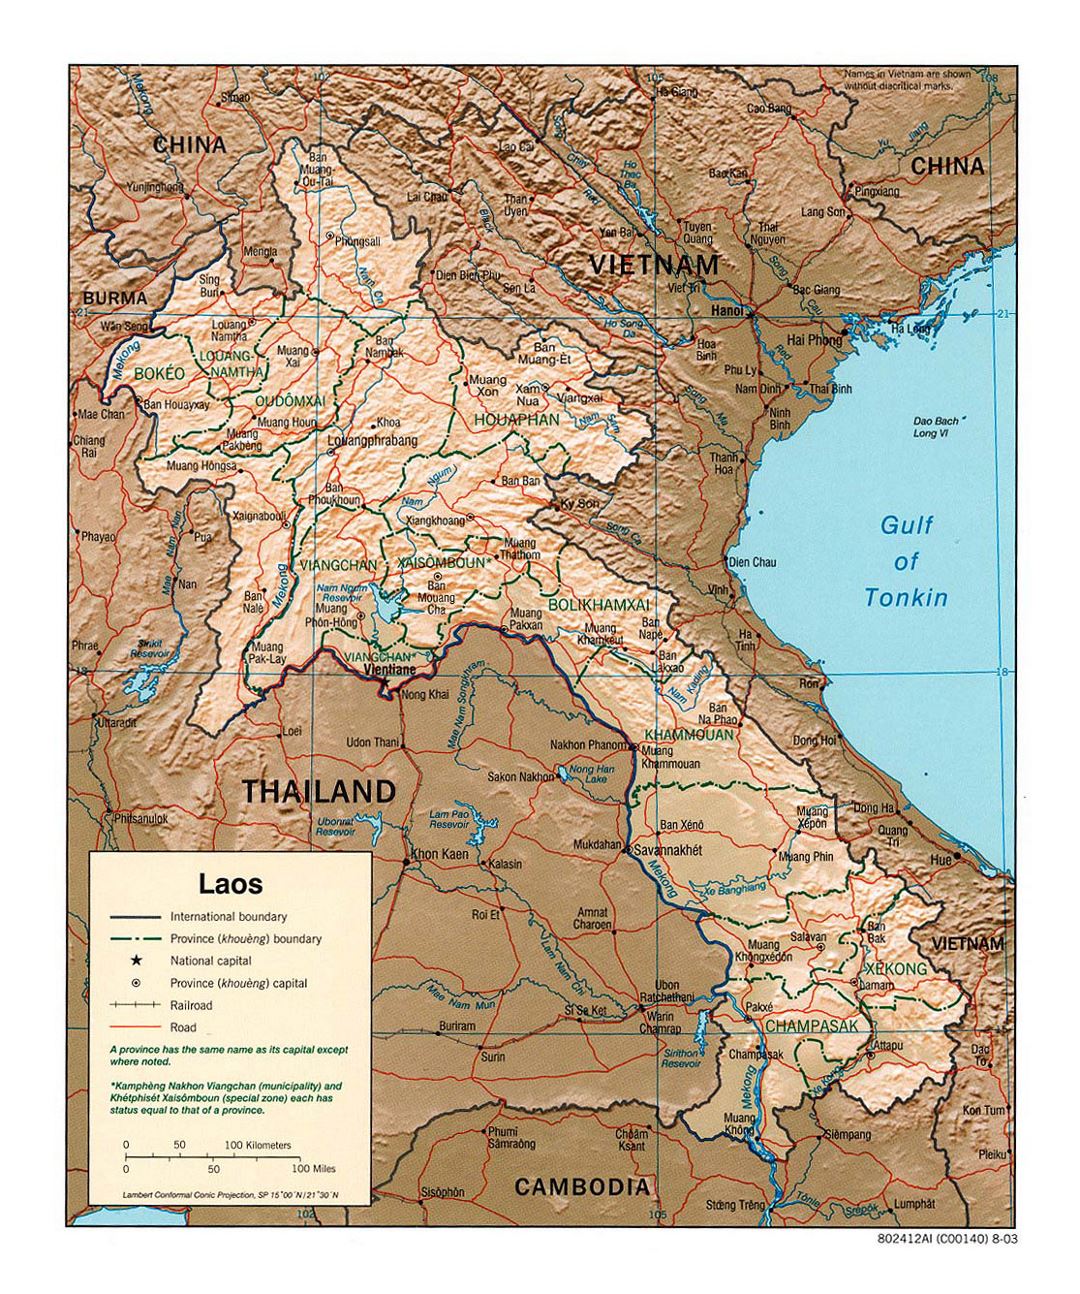 Detailed political and administrative map of Laos with relief, roads, railroads and major cities - 2003